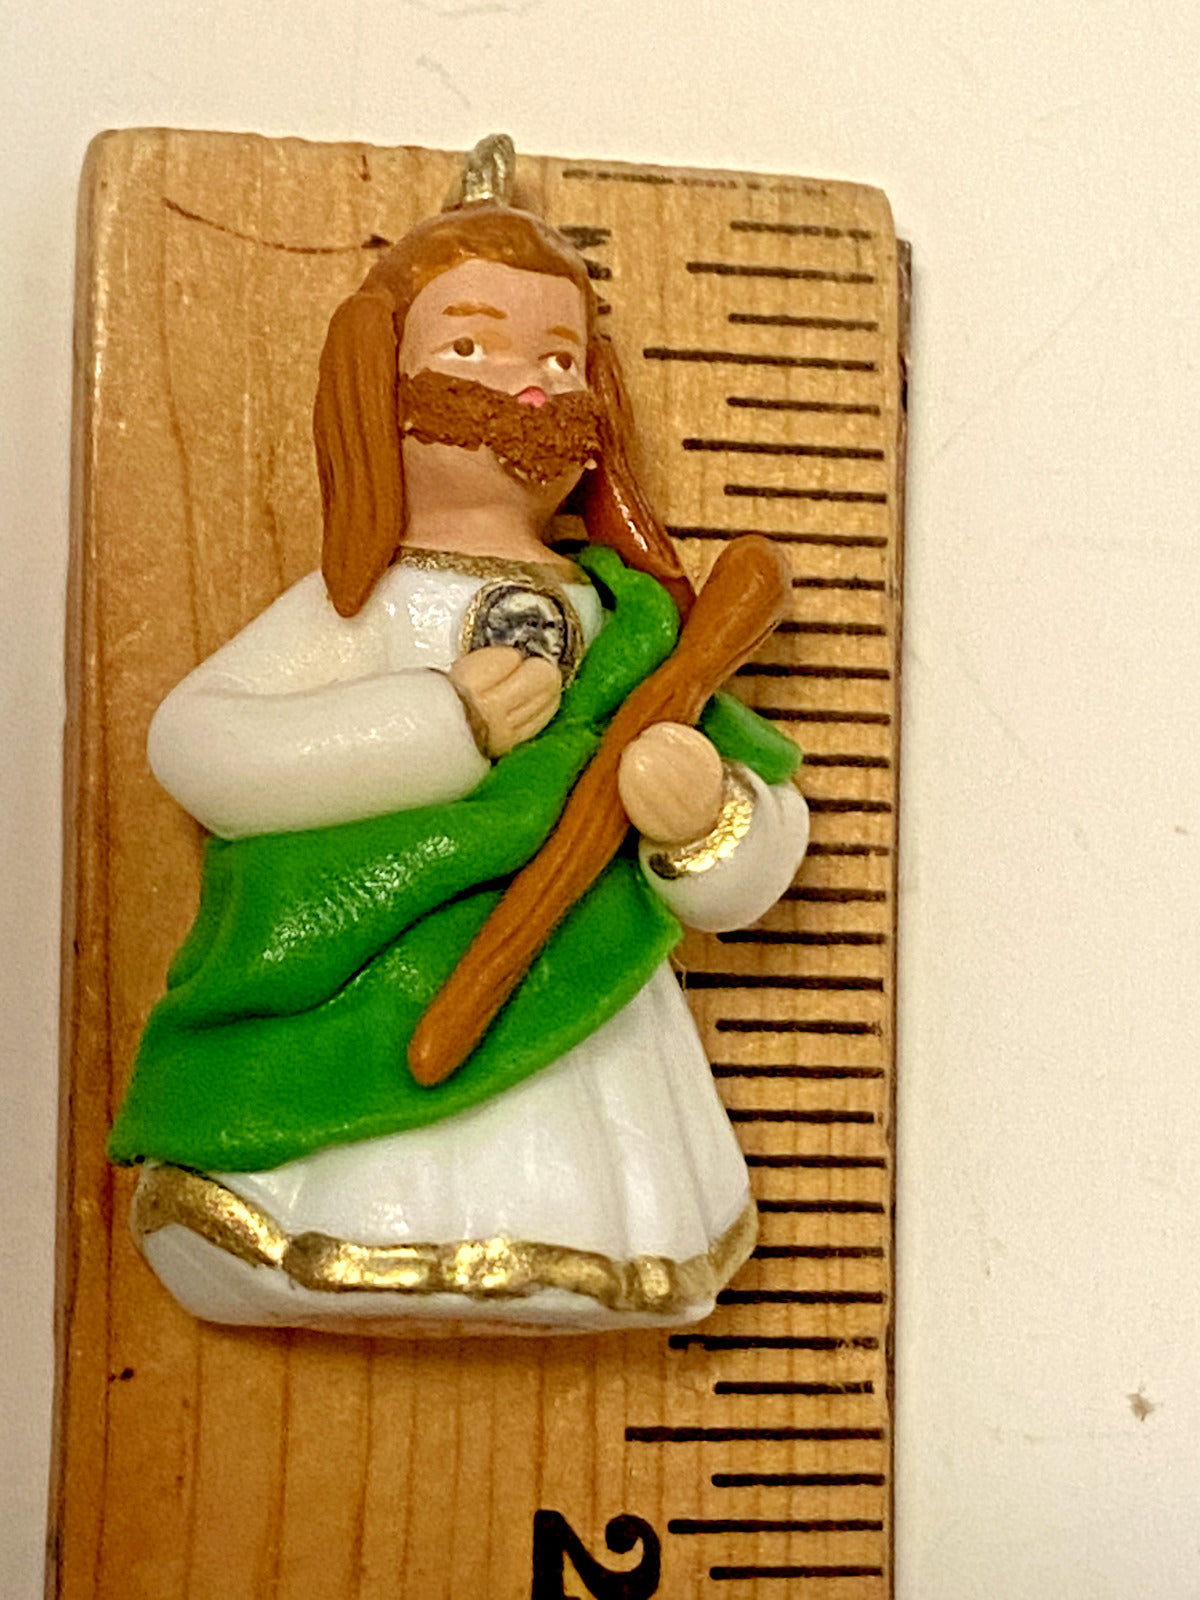 Saint Jude (Patron Saint of Difficult Situations) Miniature 1.75"Statue,New #L47 - Bob and Penny Lord